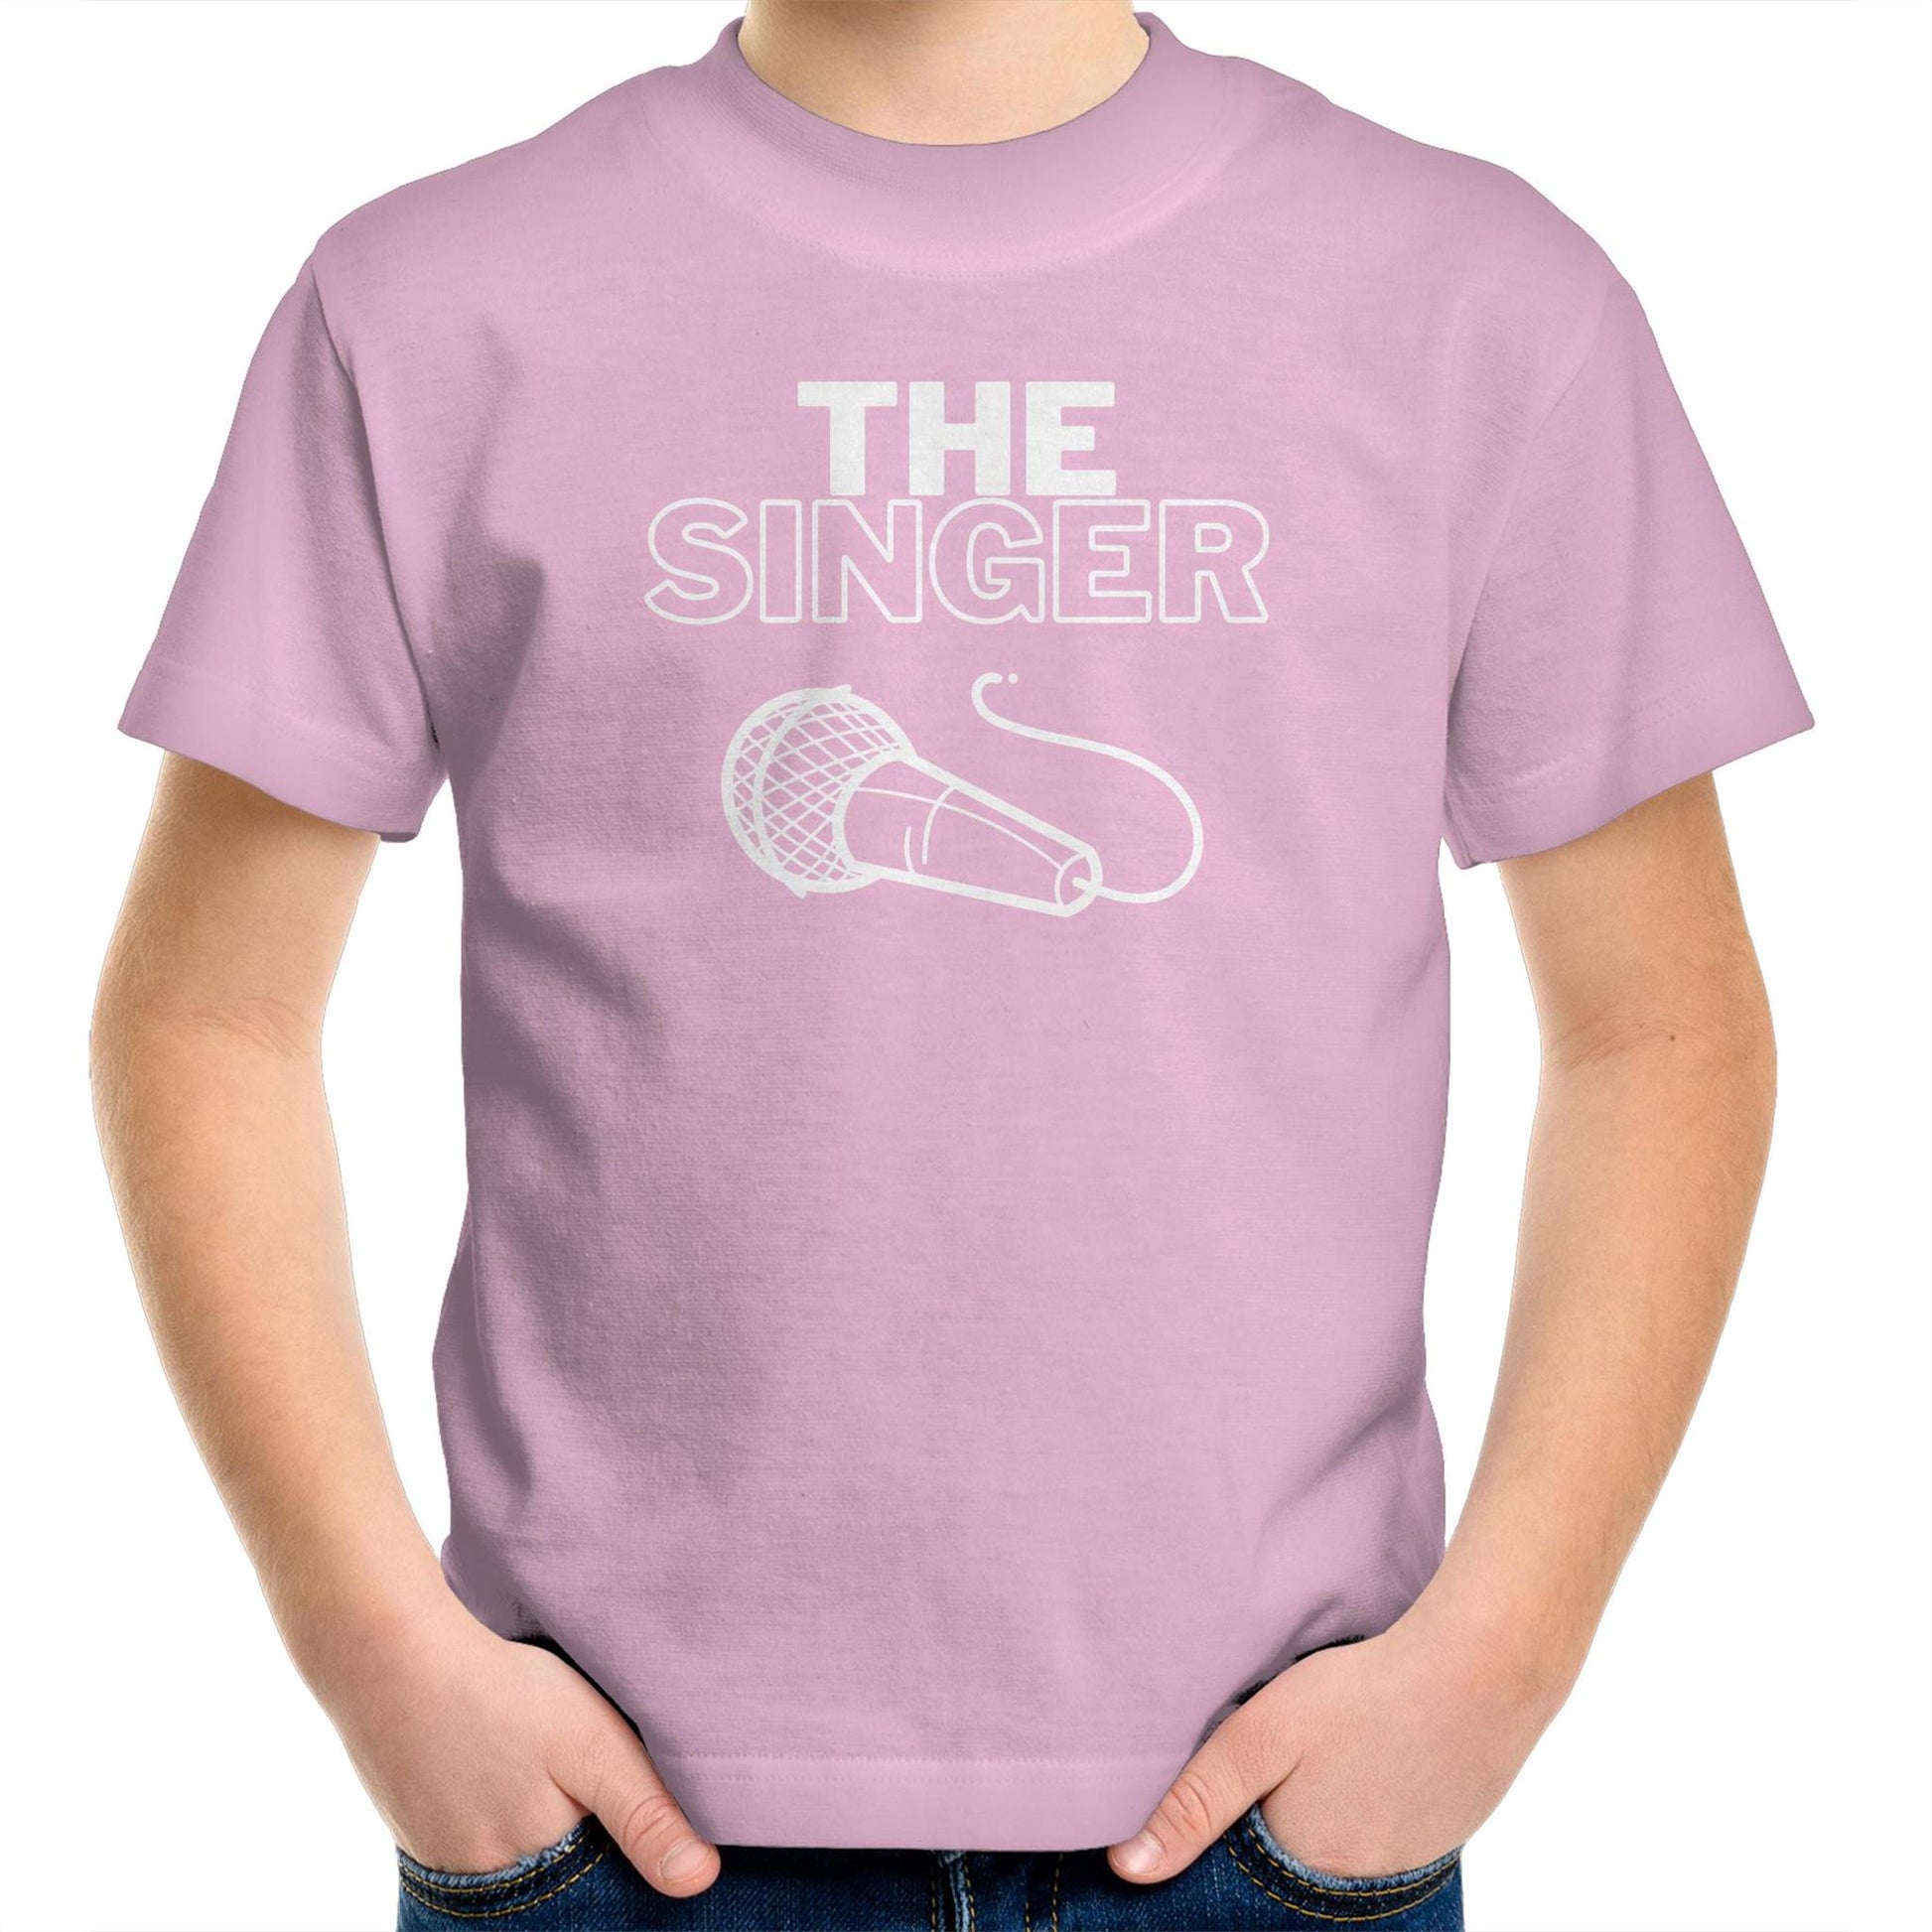 The Singer - Kids Youth T-Shirt Pink Kids Youth T-shirt Music